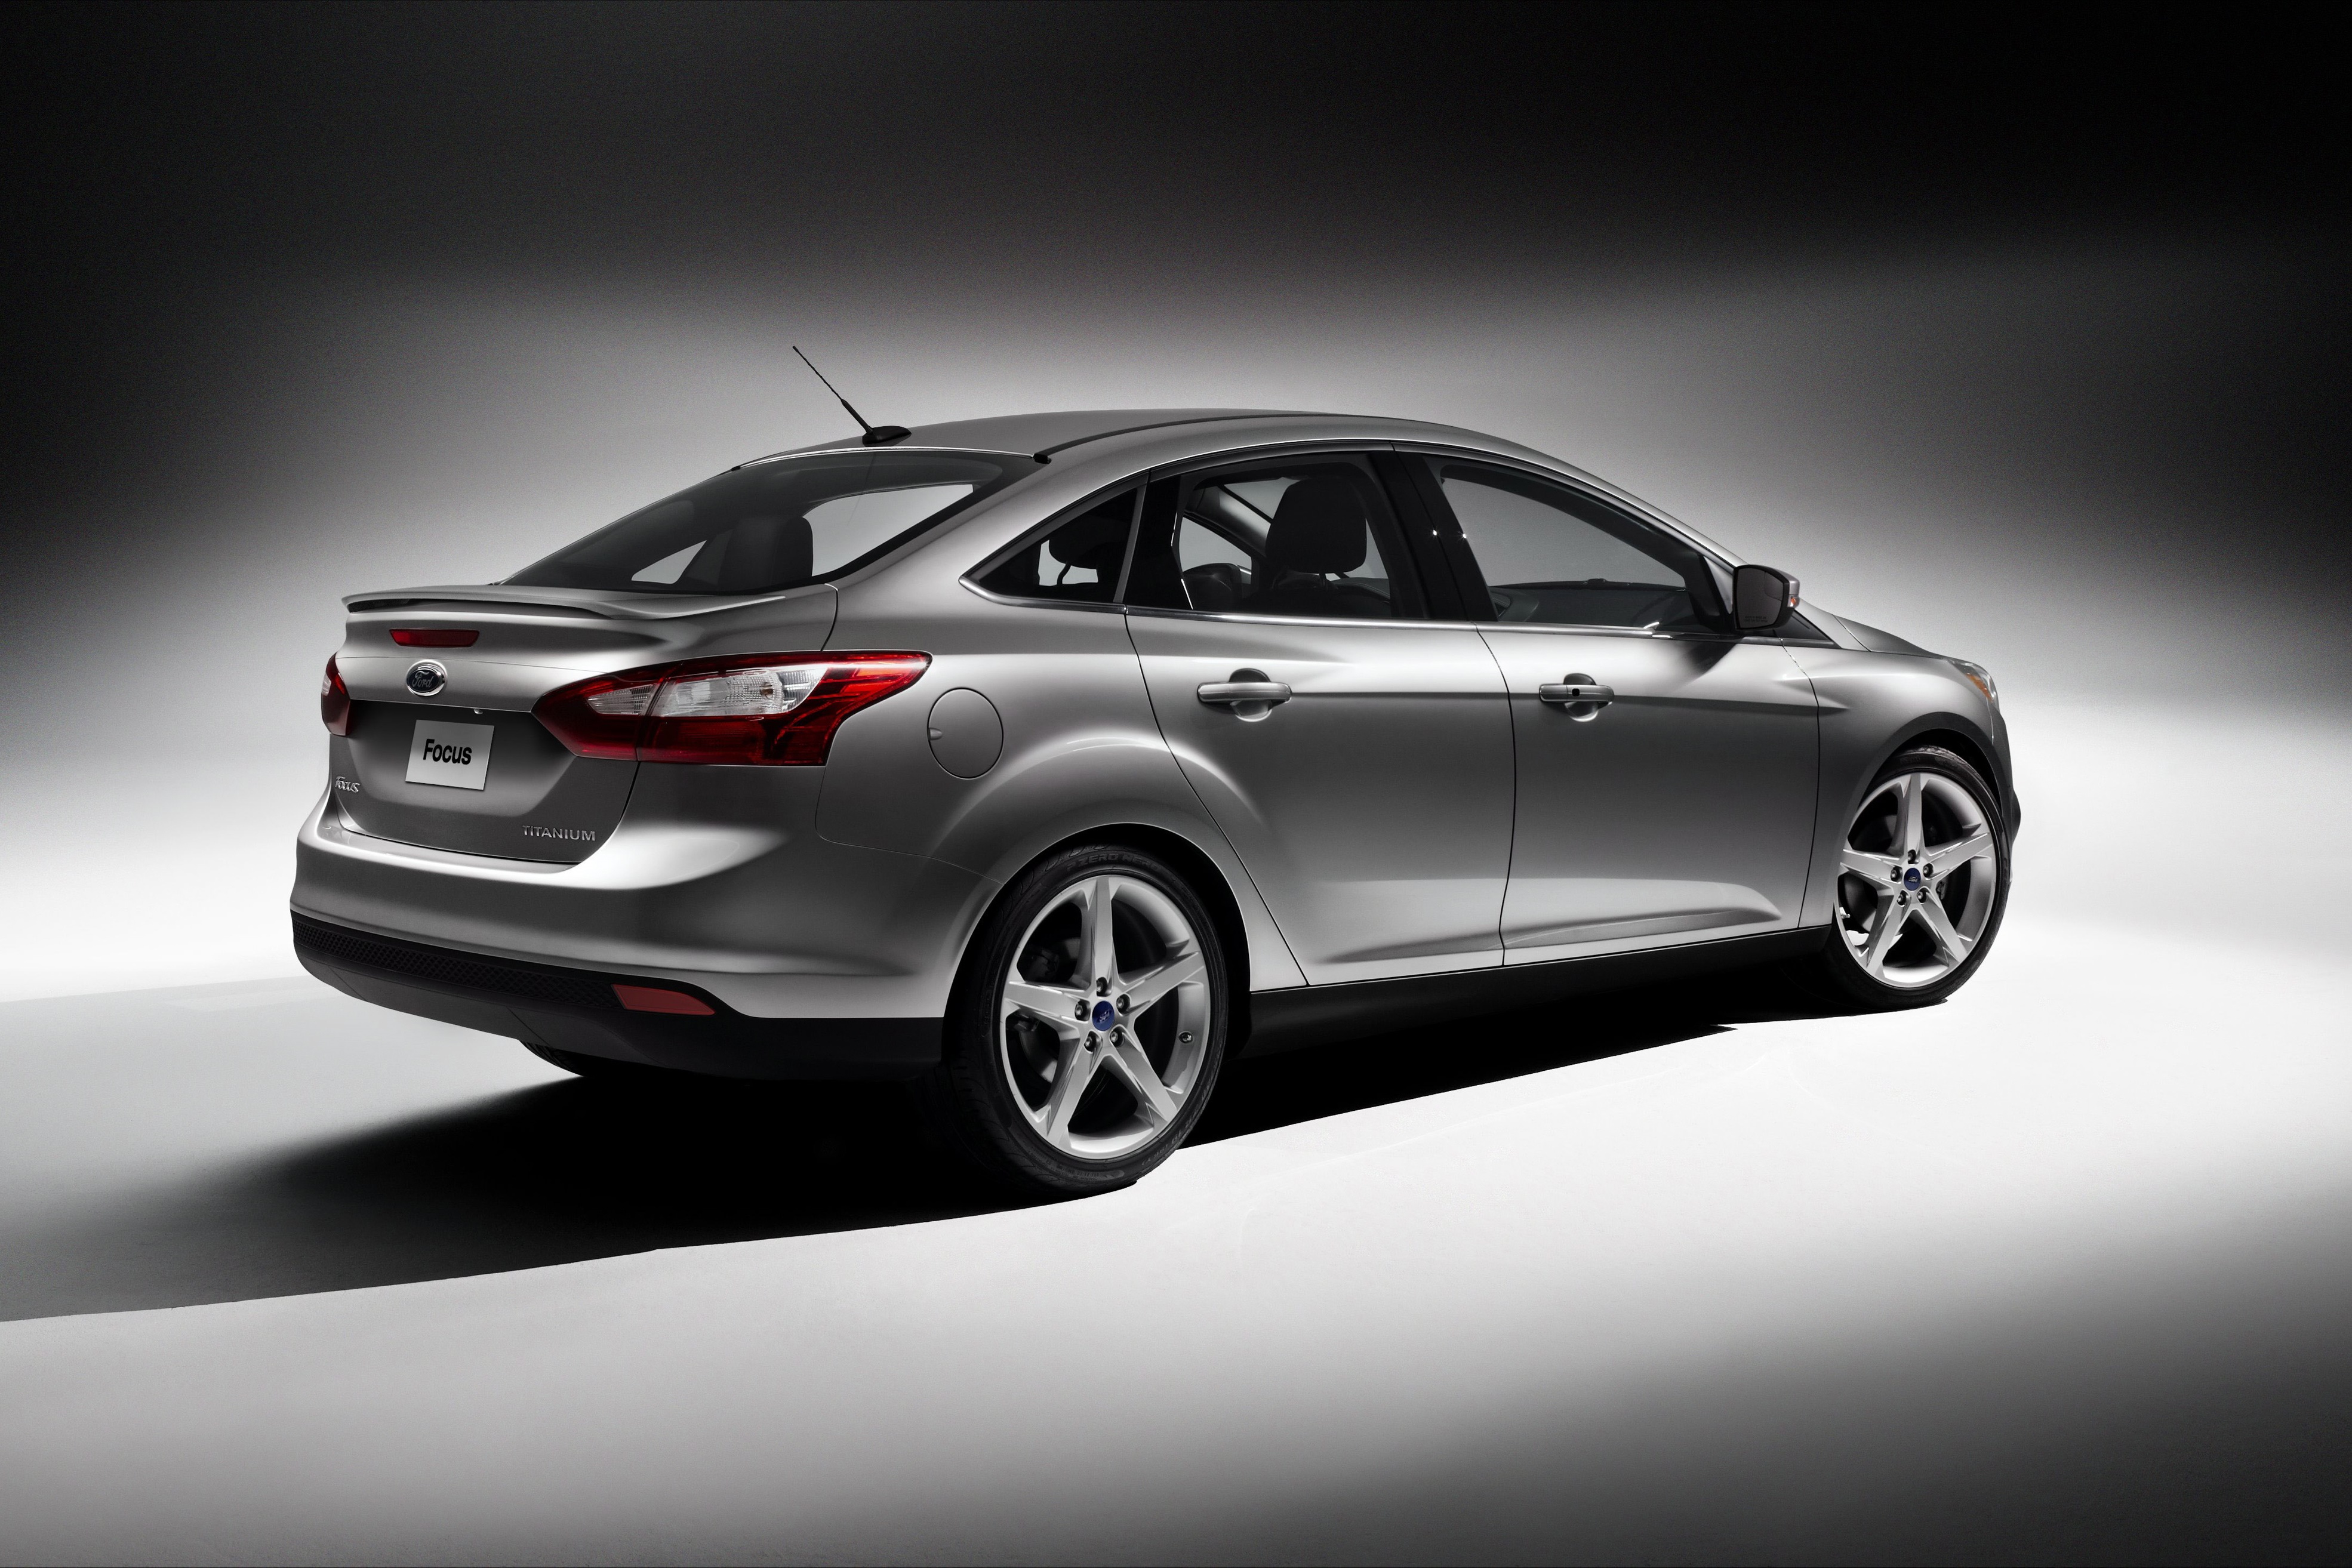 2013 Ford Focus Reviews, Insights, and Specs